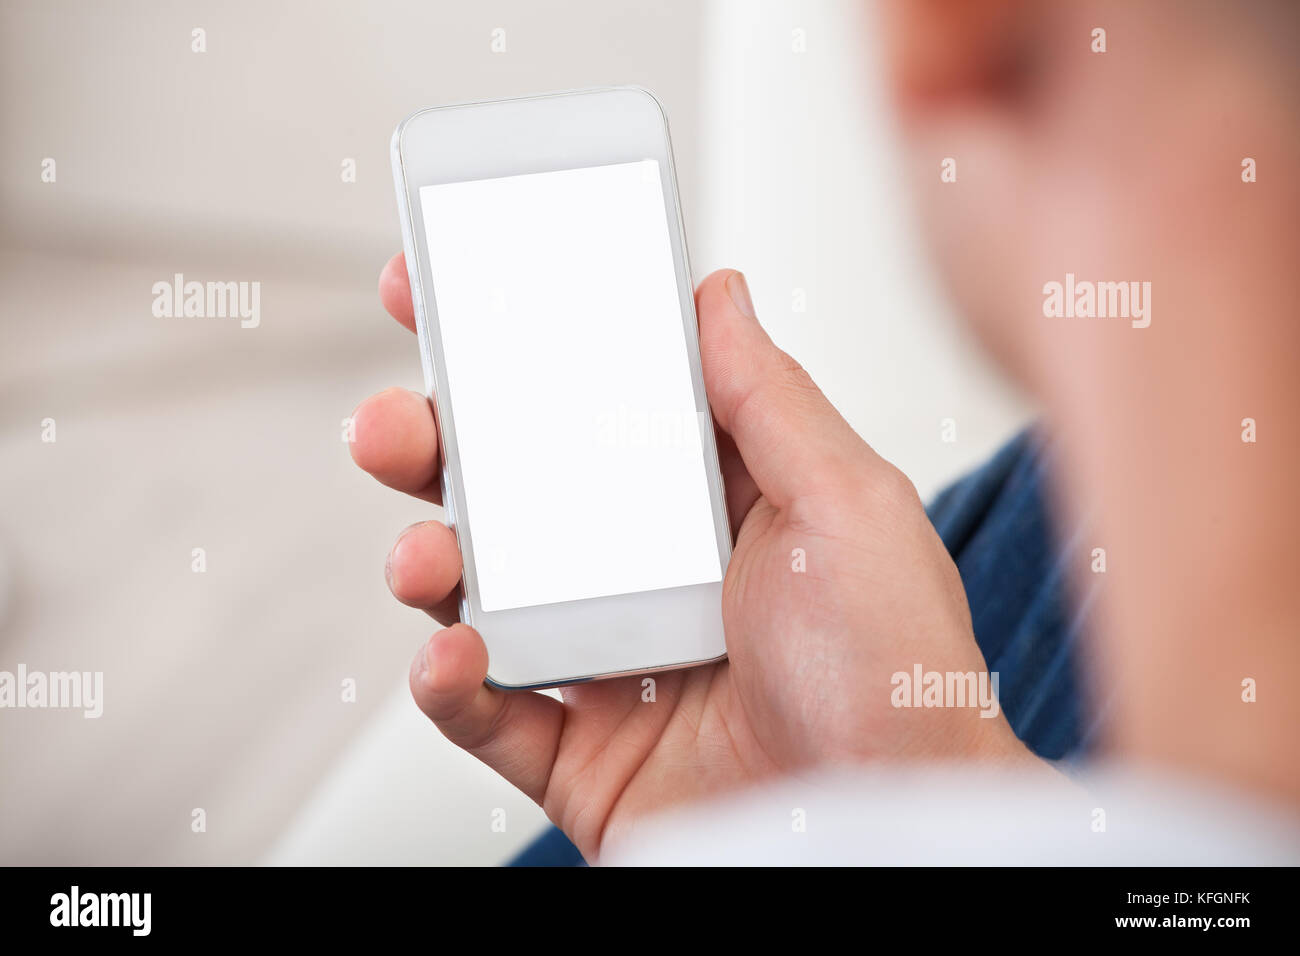 Over the shoulder view of the blank screen on a smartphone or mobile phone held in a mans hand Stock Photo